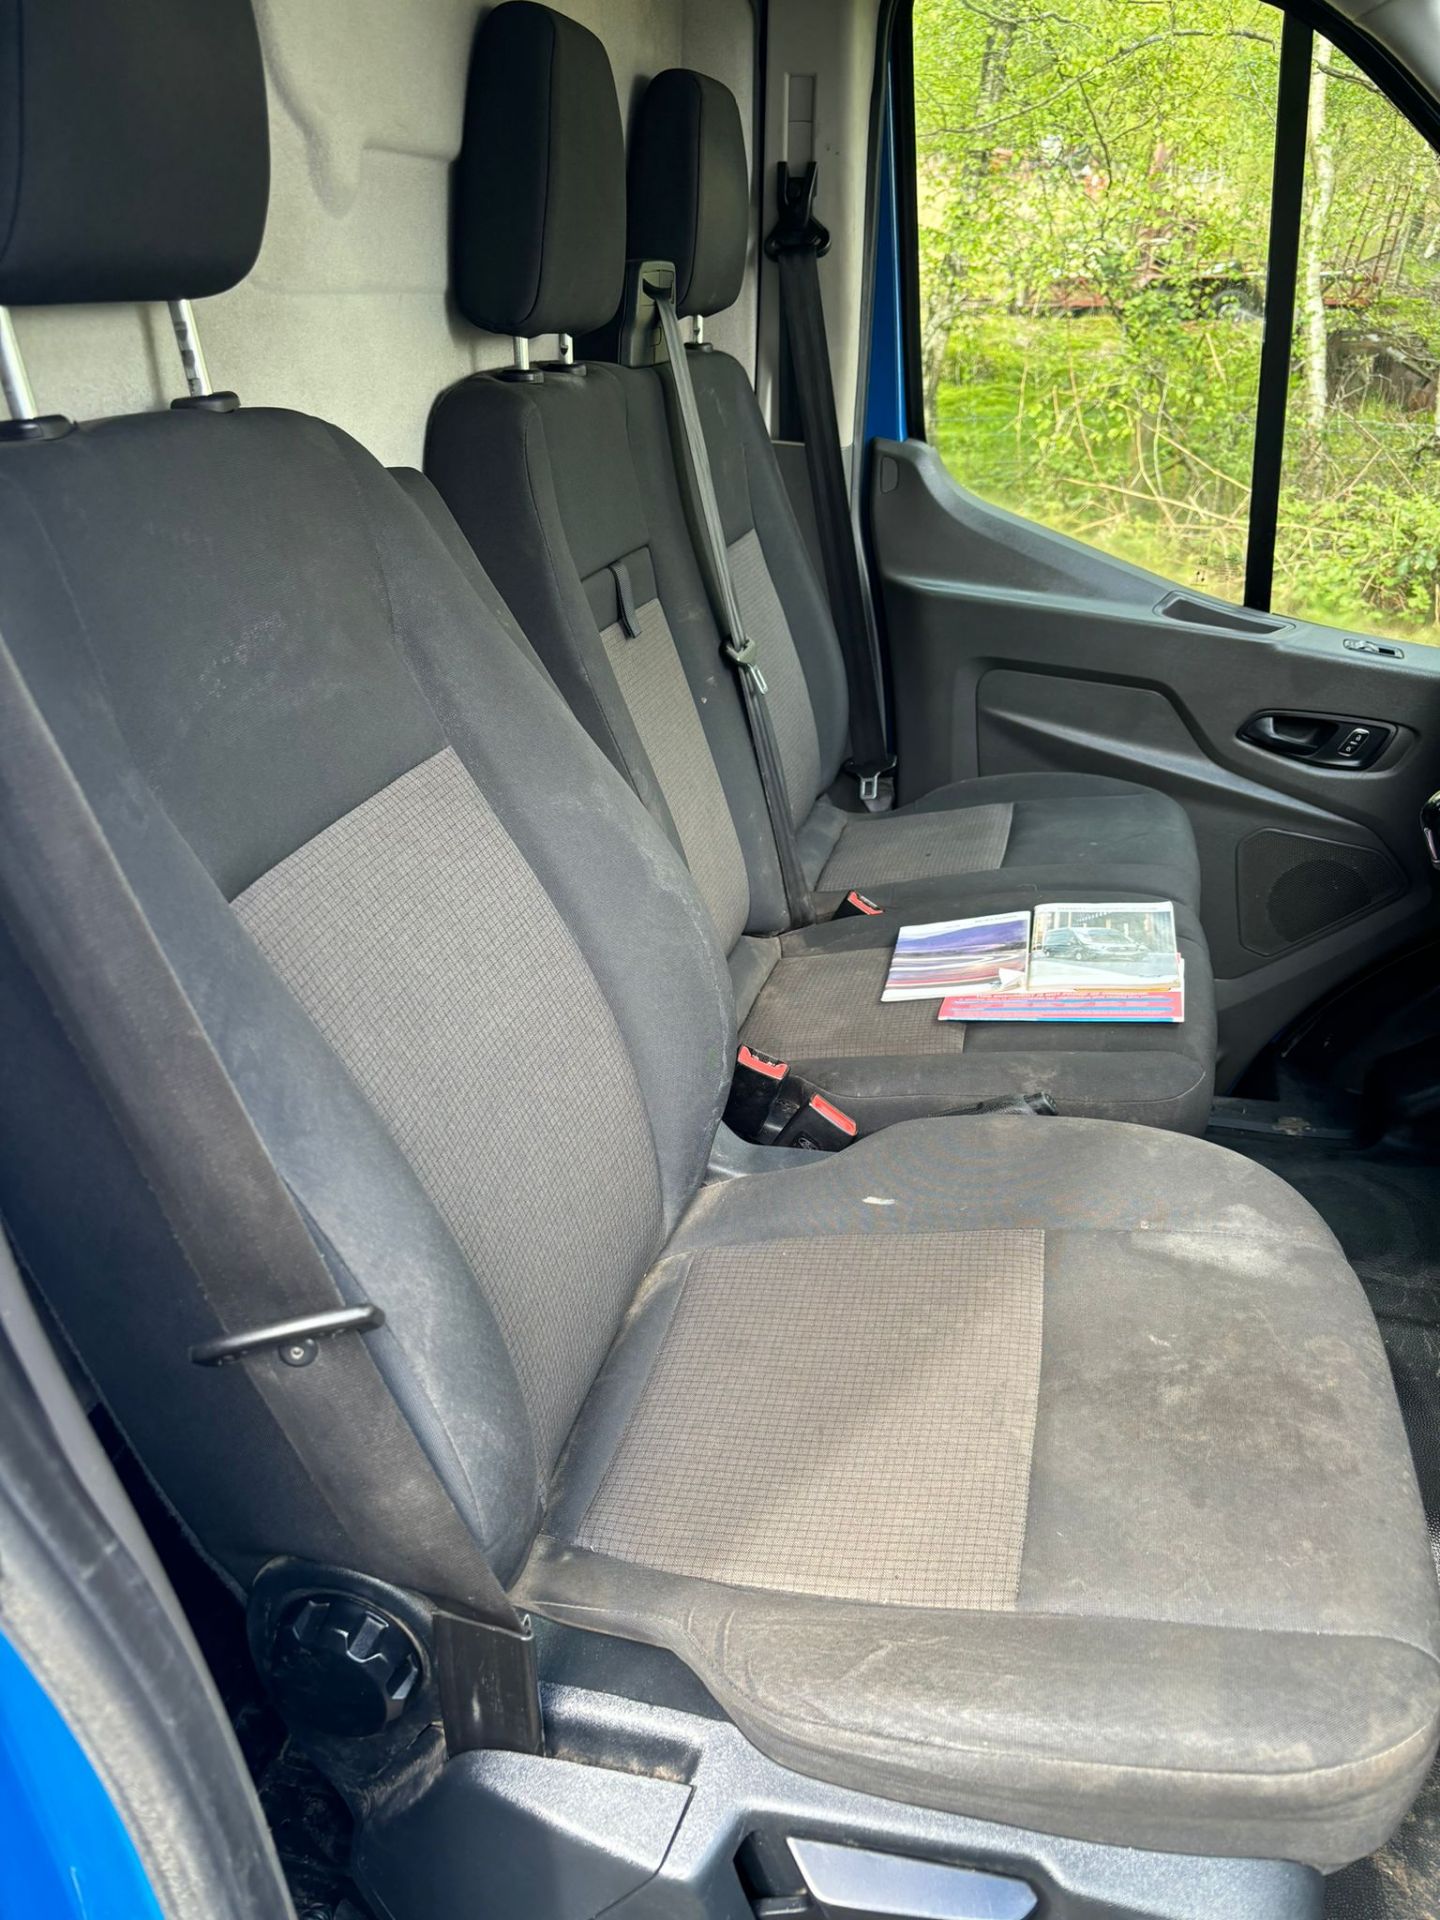 2021 FORD TRANSIT T350 PANEL VAN - LOW MILEAGE, IMMACULATE CONDITION! - Image 8 of 13